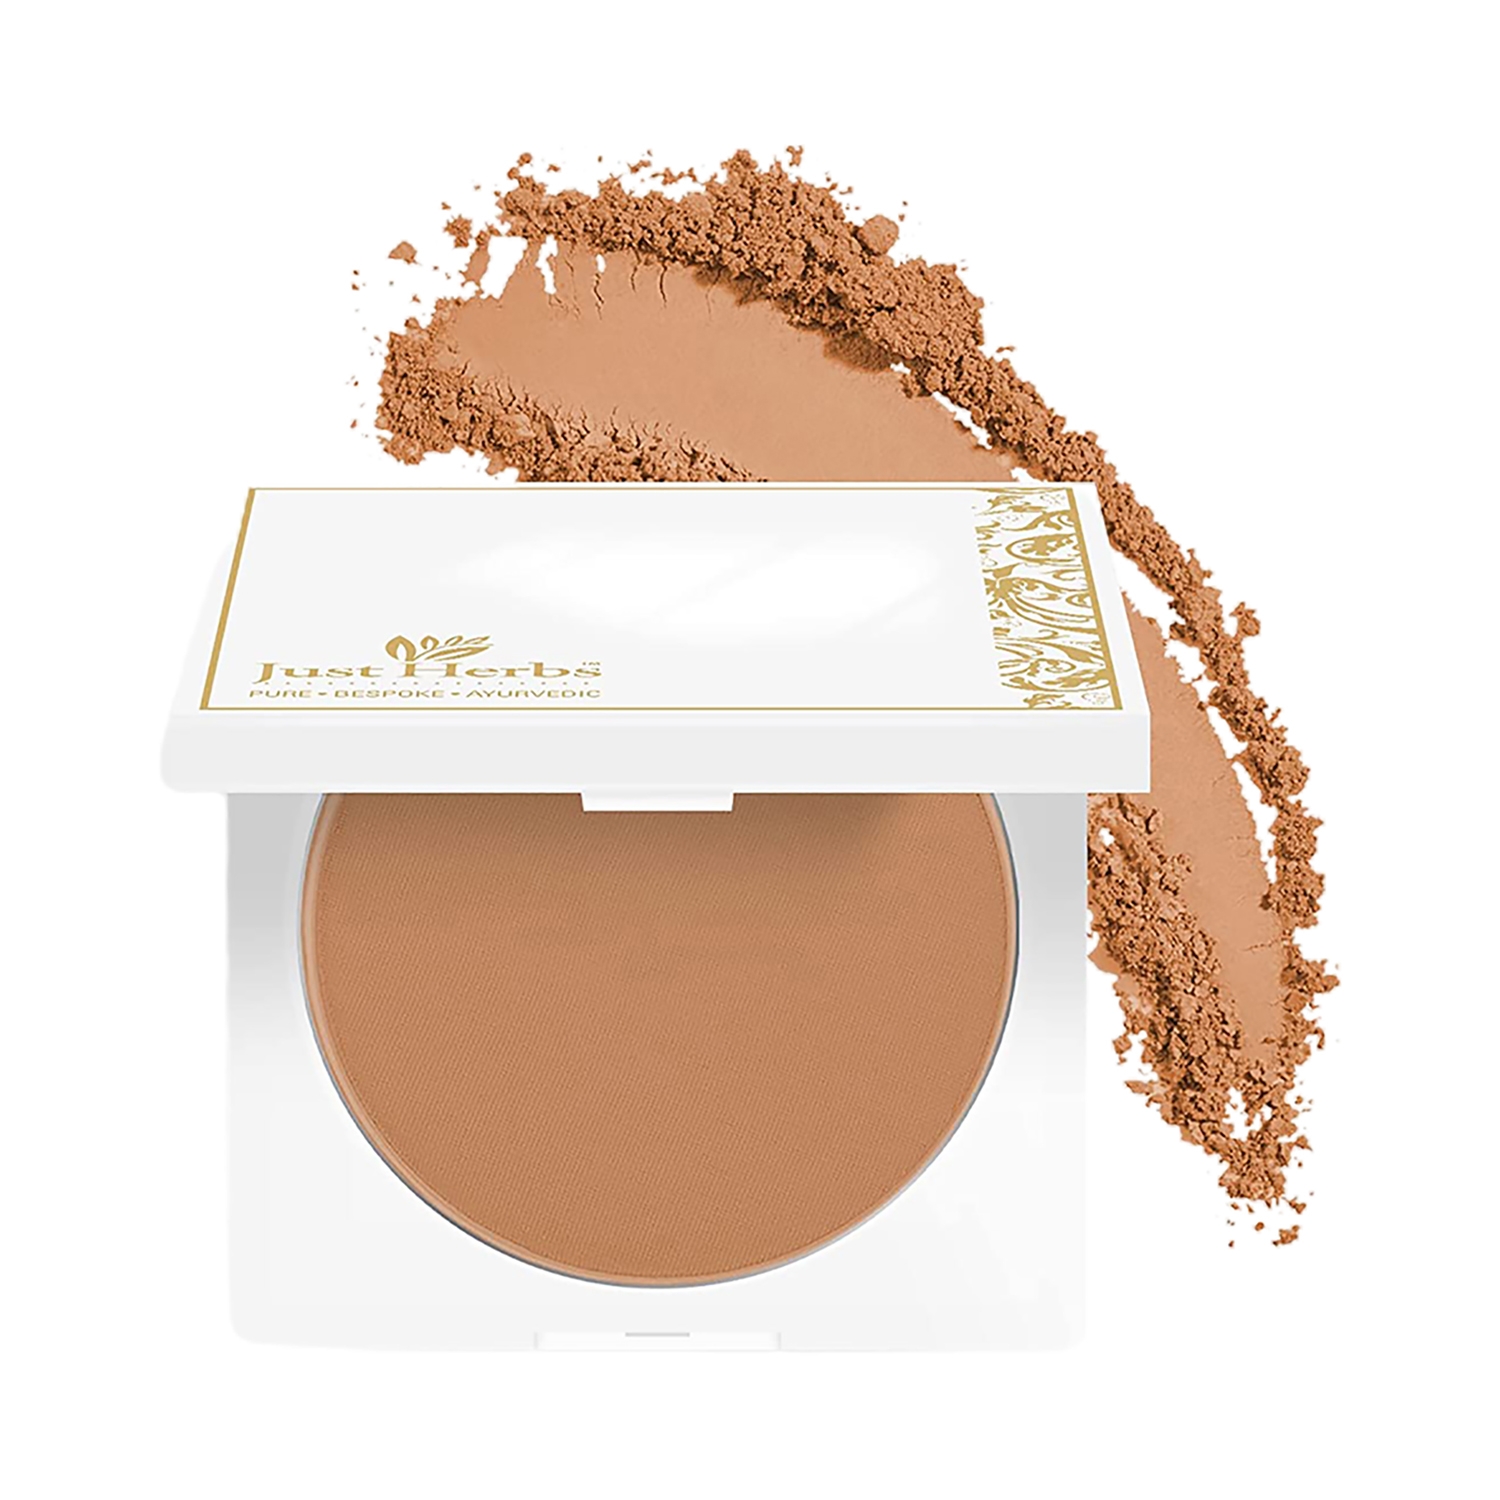 Just Herbs | Just Herbs Mattifying & Hydrating Vitamin E SPF 15 Compact Powder - 05 Copper (9g)